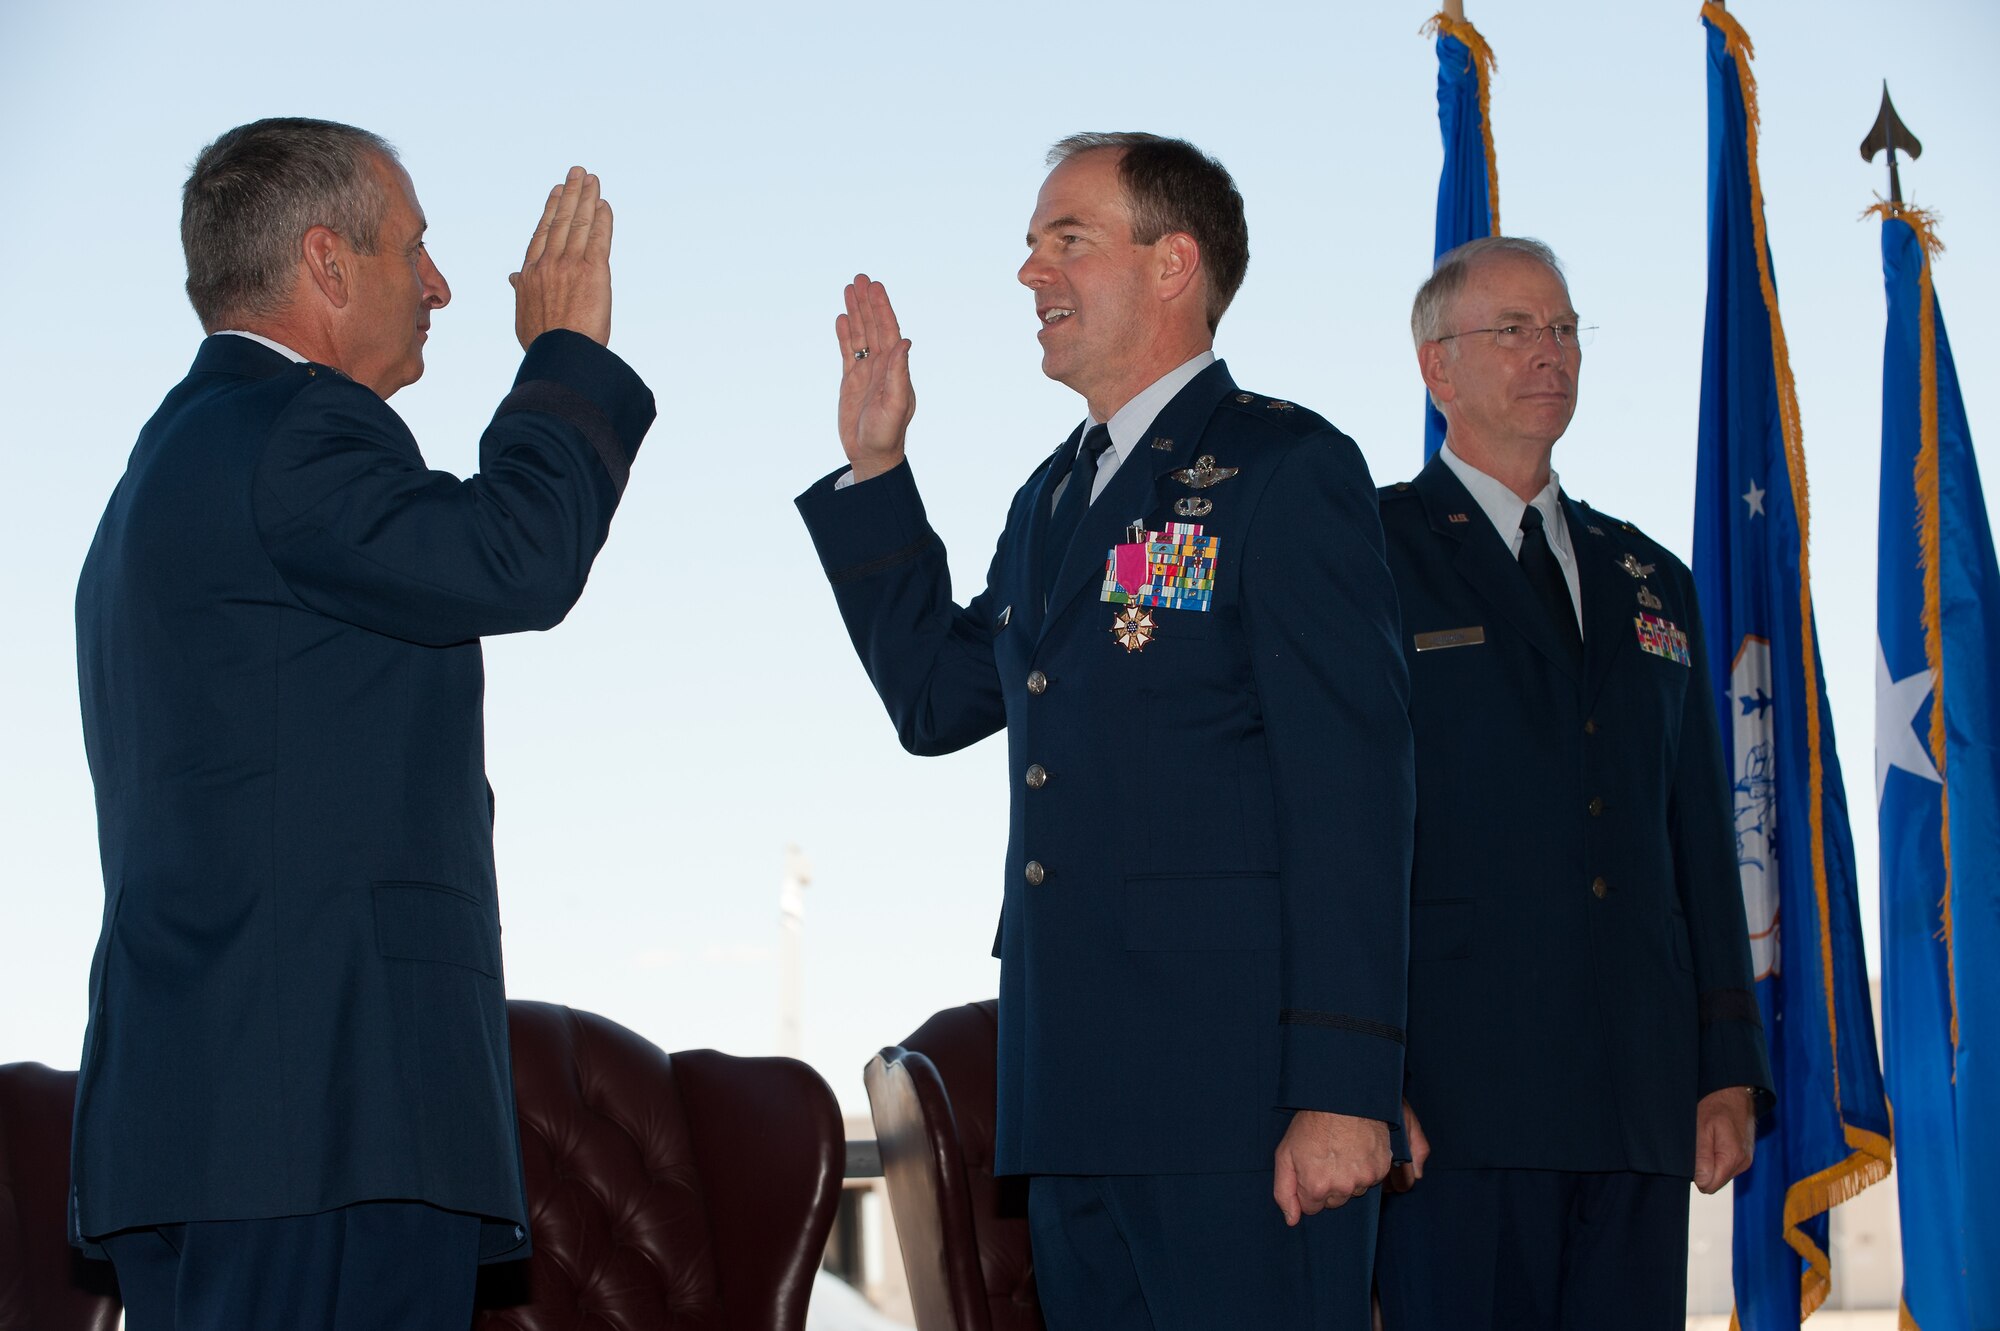 The Adjutant General of Colorado Maj. Gen. H. Michael Edwards administers the Oath of Office to Brig. Gen. Richard L. Martin Sept. 10. Martin is assuming command of the Colorado Air National Guard and the position of Assistant Adjutant General - Air. He is the former Director of Operations for the Colorado Air National Guard. (U.S. Air Force photo/Master Sgt. John Nimmo, Sr.) (RELEASED)